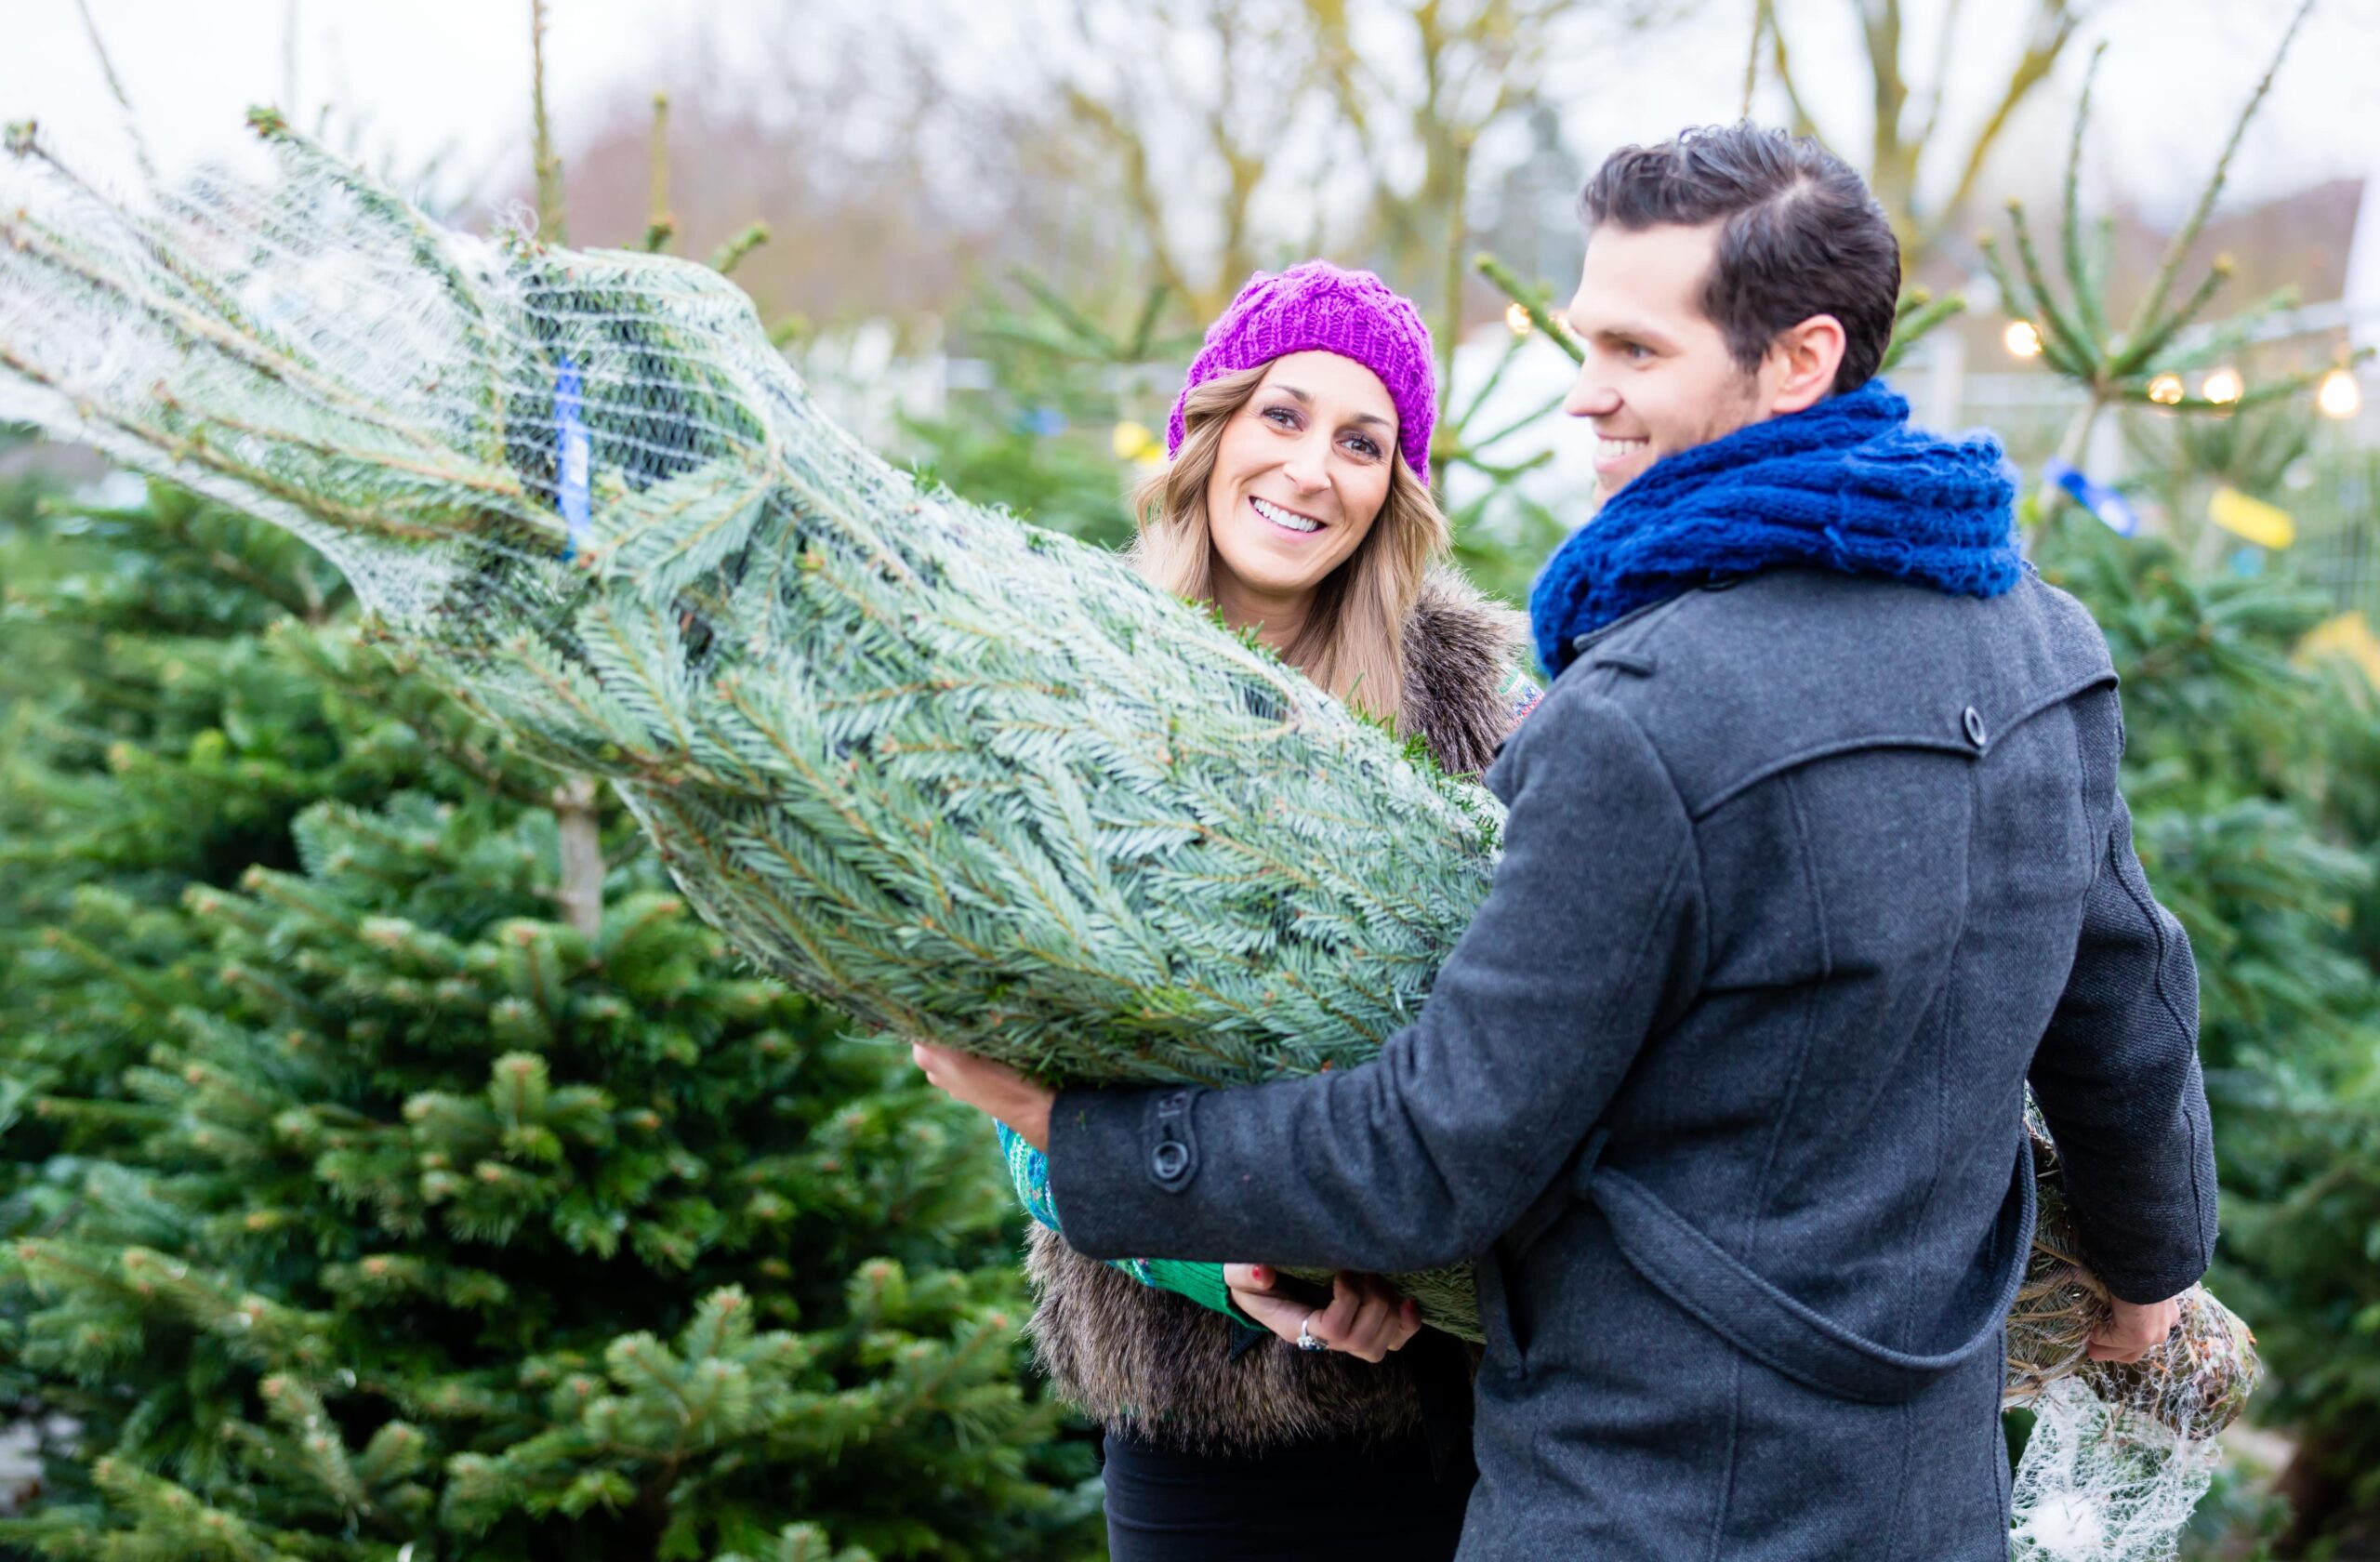 Bluebell Wood launches Christmas tree recycling service across Rotherham